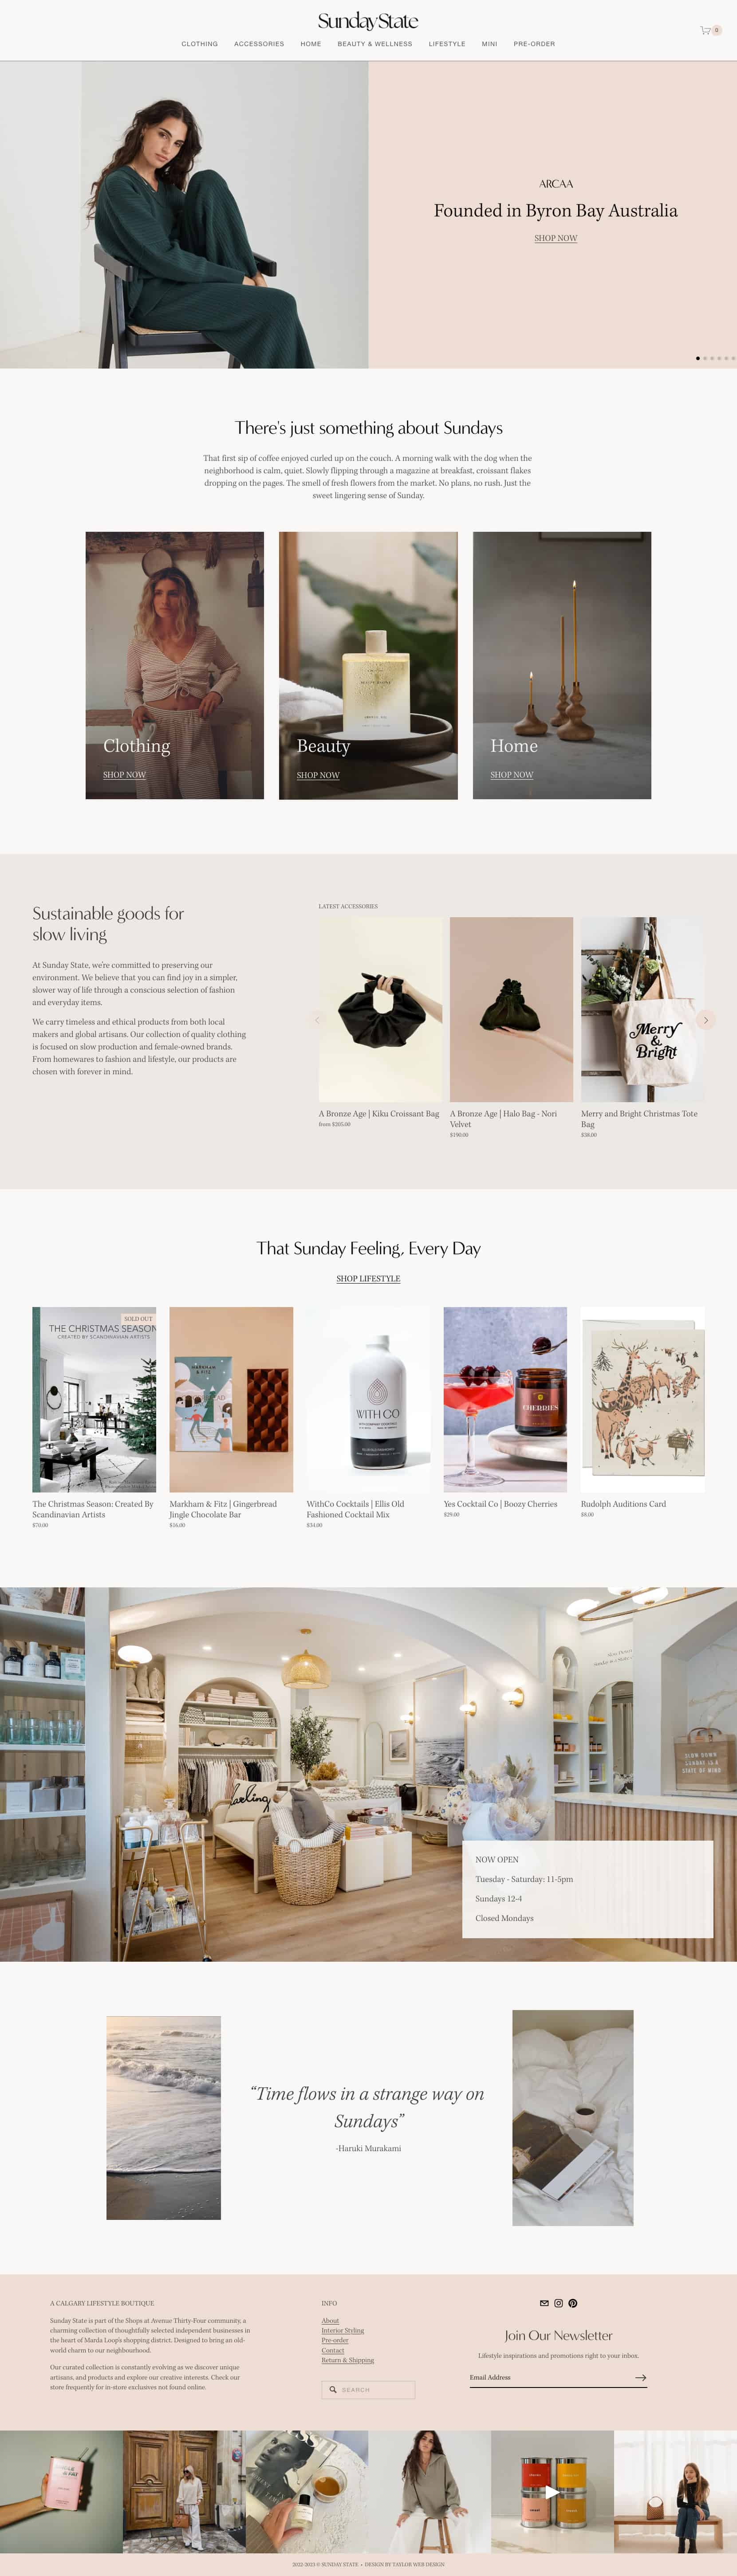 Squarespace Ecommerce Examples 1: Sunday State - Clean and Modern Product Page Design